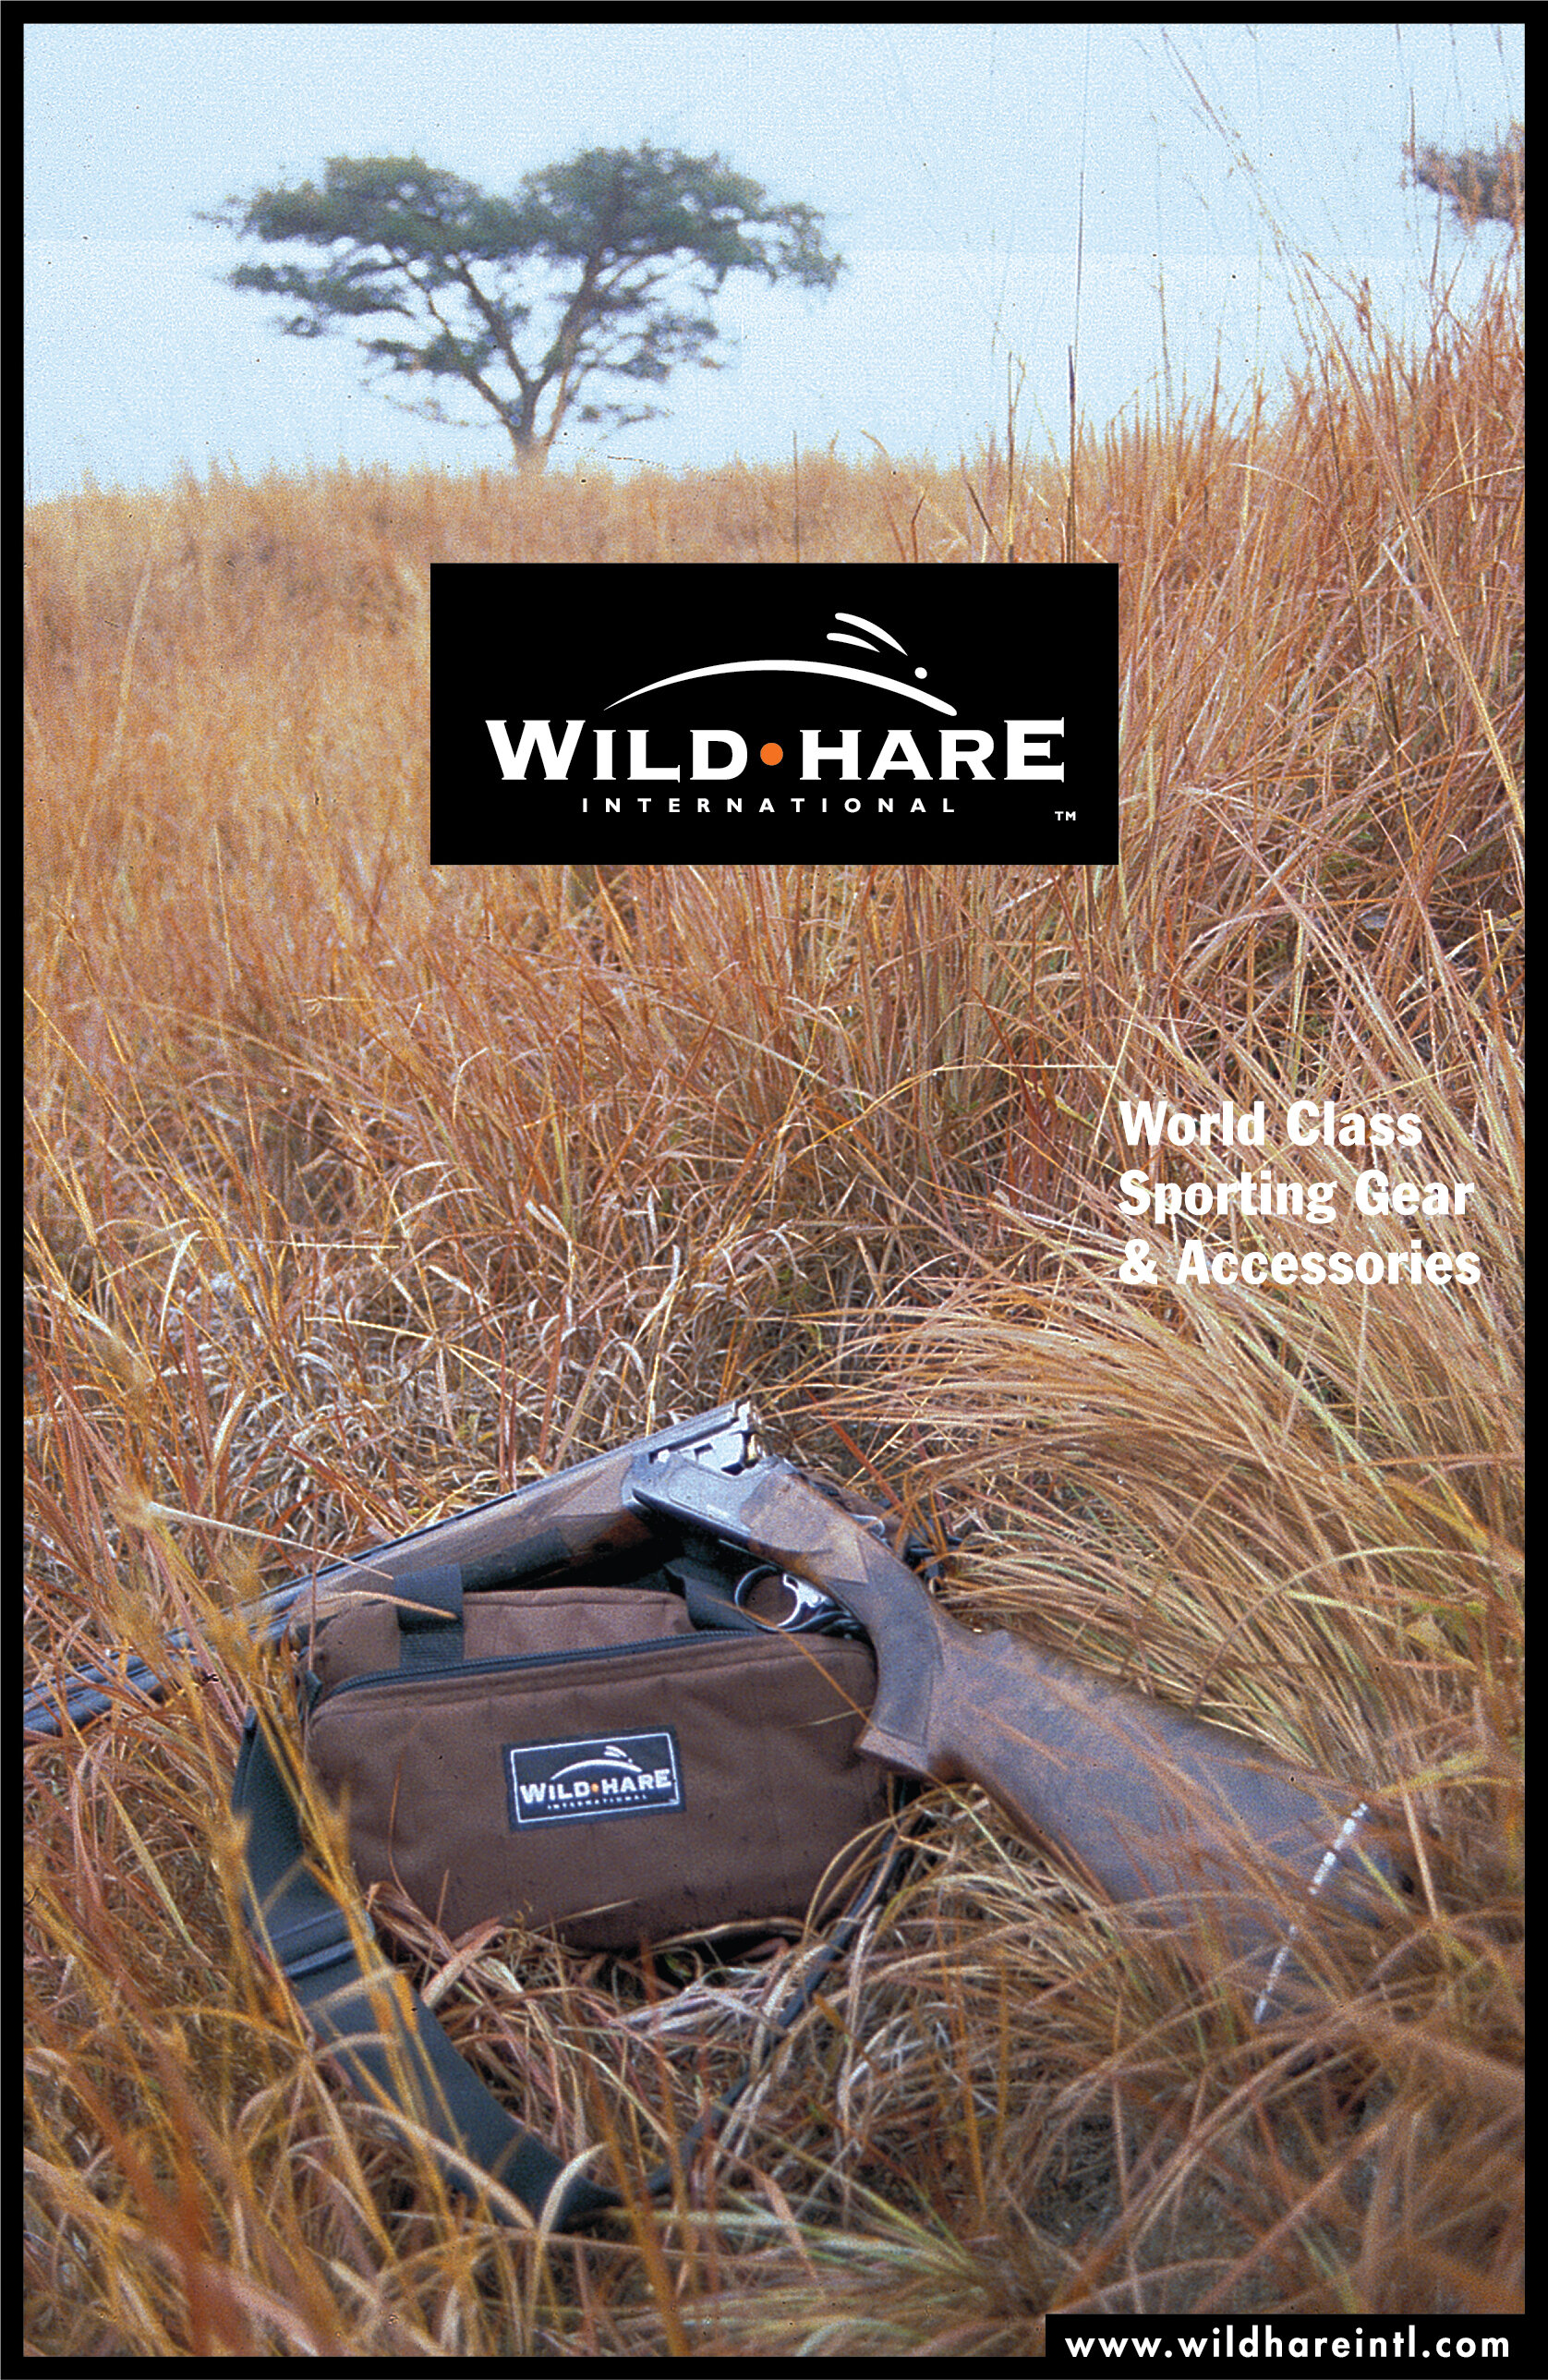  Wild•Hare International product catalog cover  Design, branding and creative direction by Chuck Mitchell  Photograph courtesy of John Woolley 